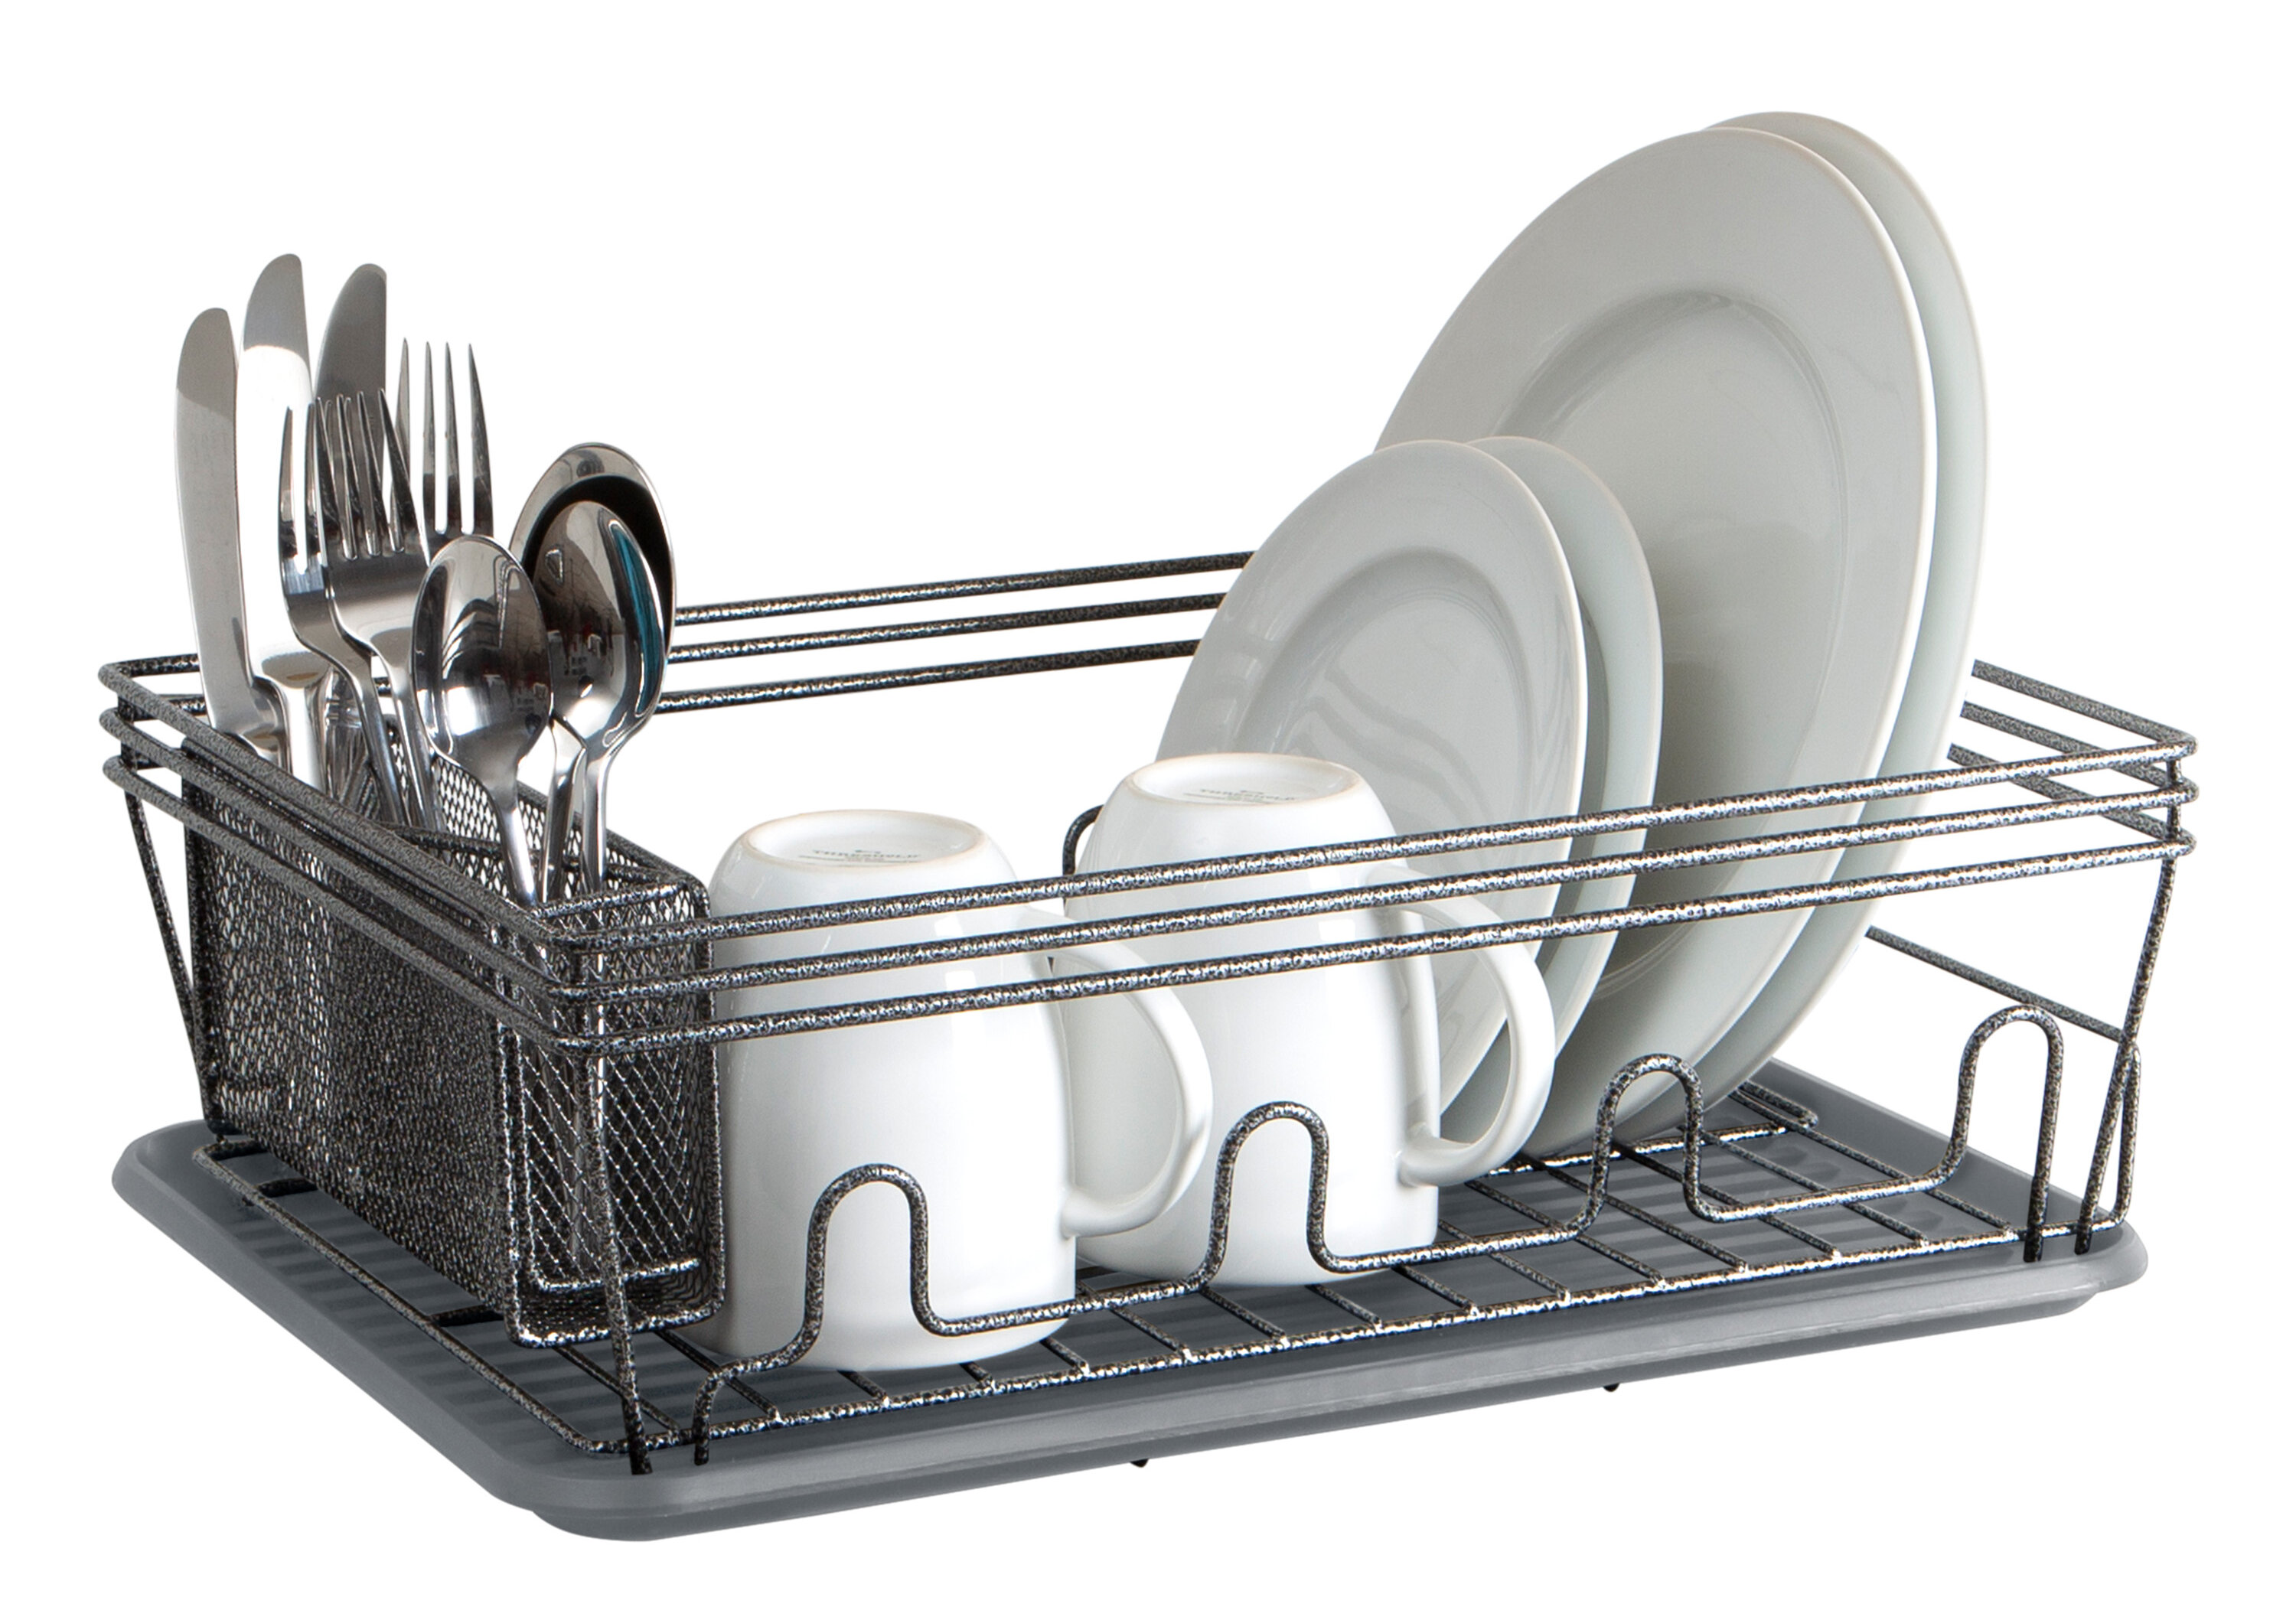 SAYZH Large Dish Drying Rack for Kitchen Counter Extendable Dish Rack with Drainboard Set Stainless Steel Dish Strainer with Cup Holder and Utensil Holder